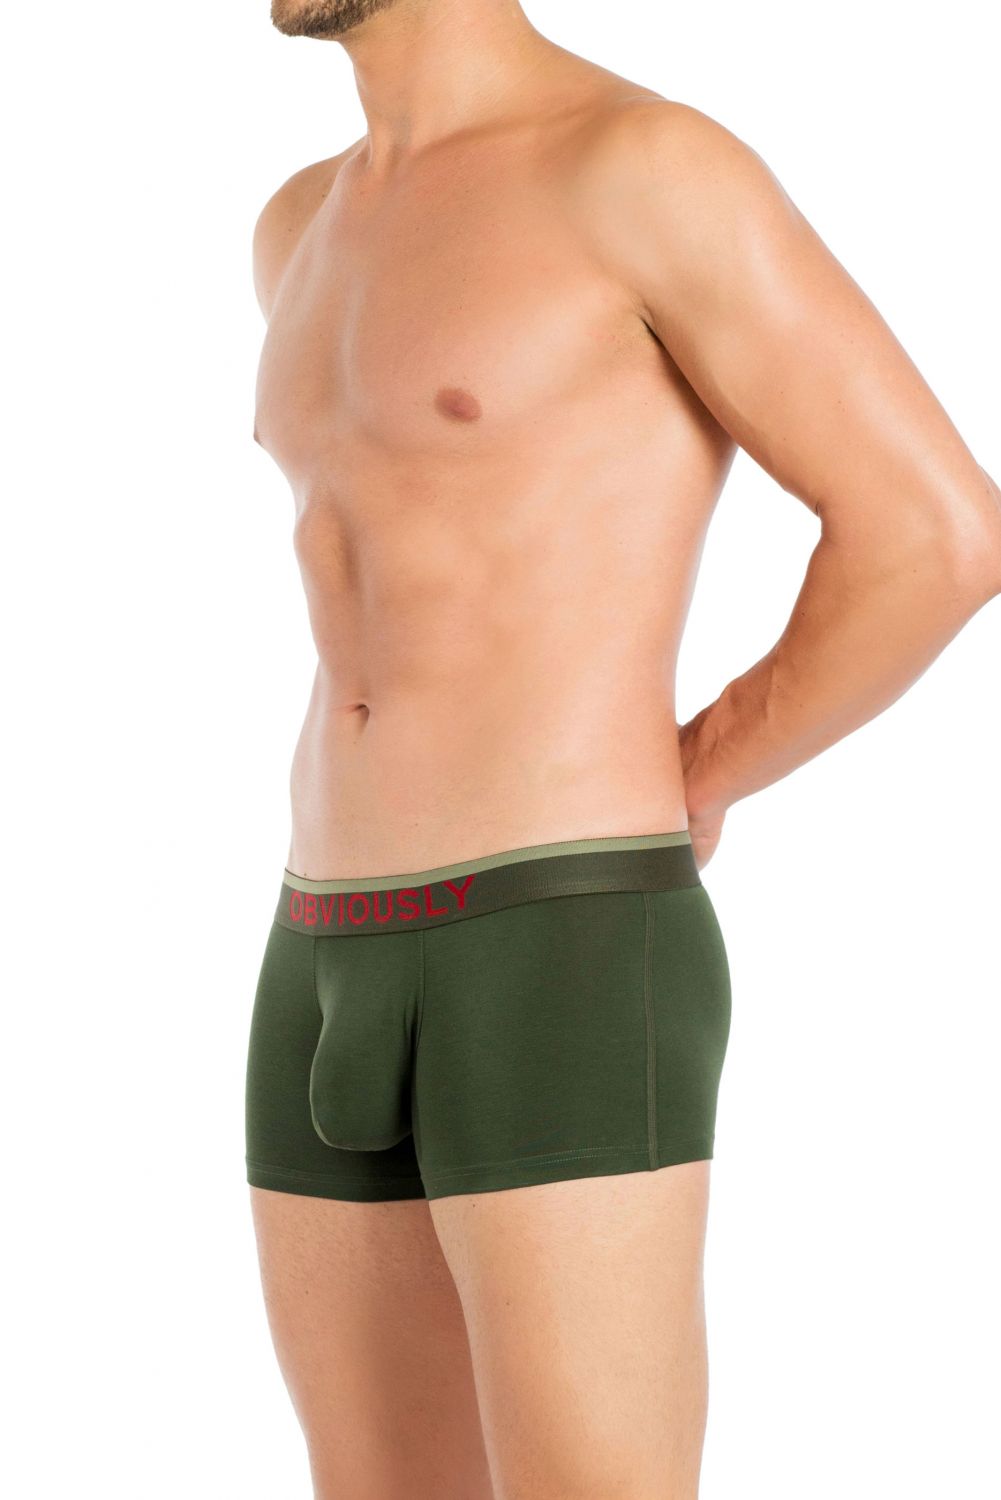 Men and Underwear on X: The FreeMan Trunks of Obviously feature the  AnatoFREE anatomical shape pouch designed specifically for the male anatomy  and are made from the highest quality bamboo rayon mix